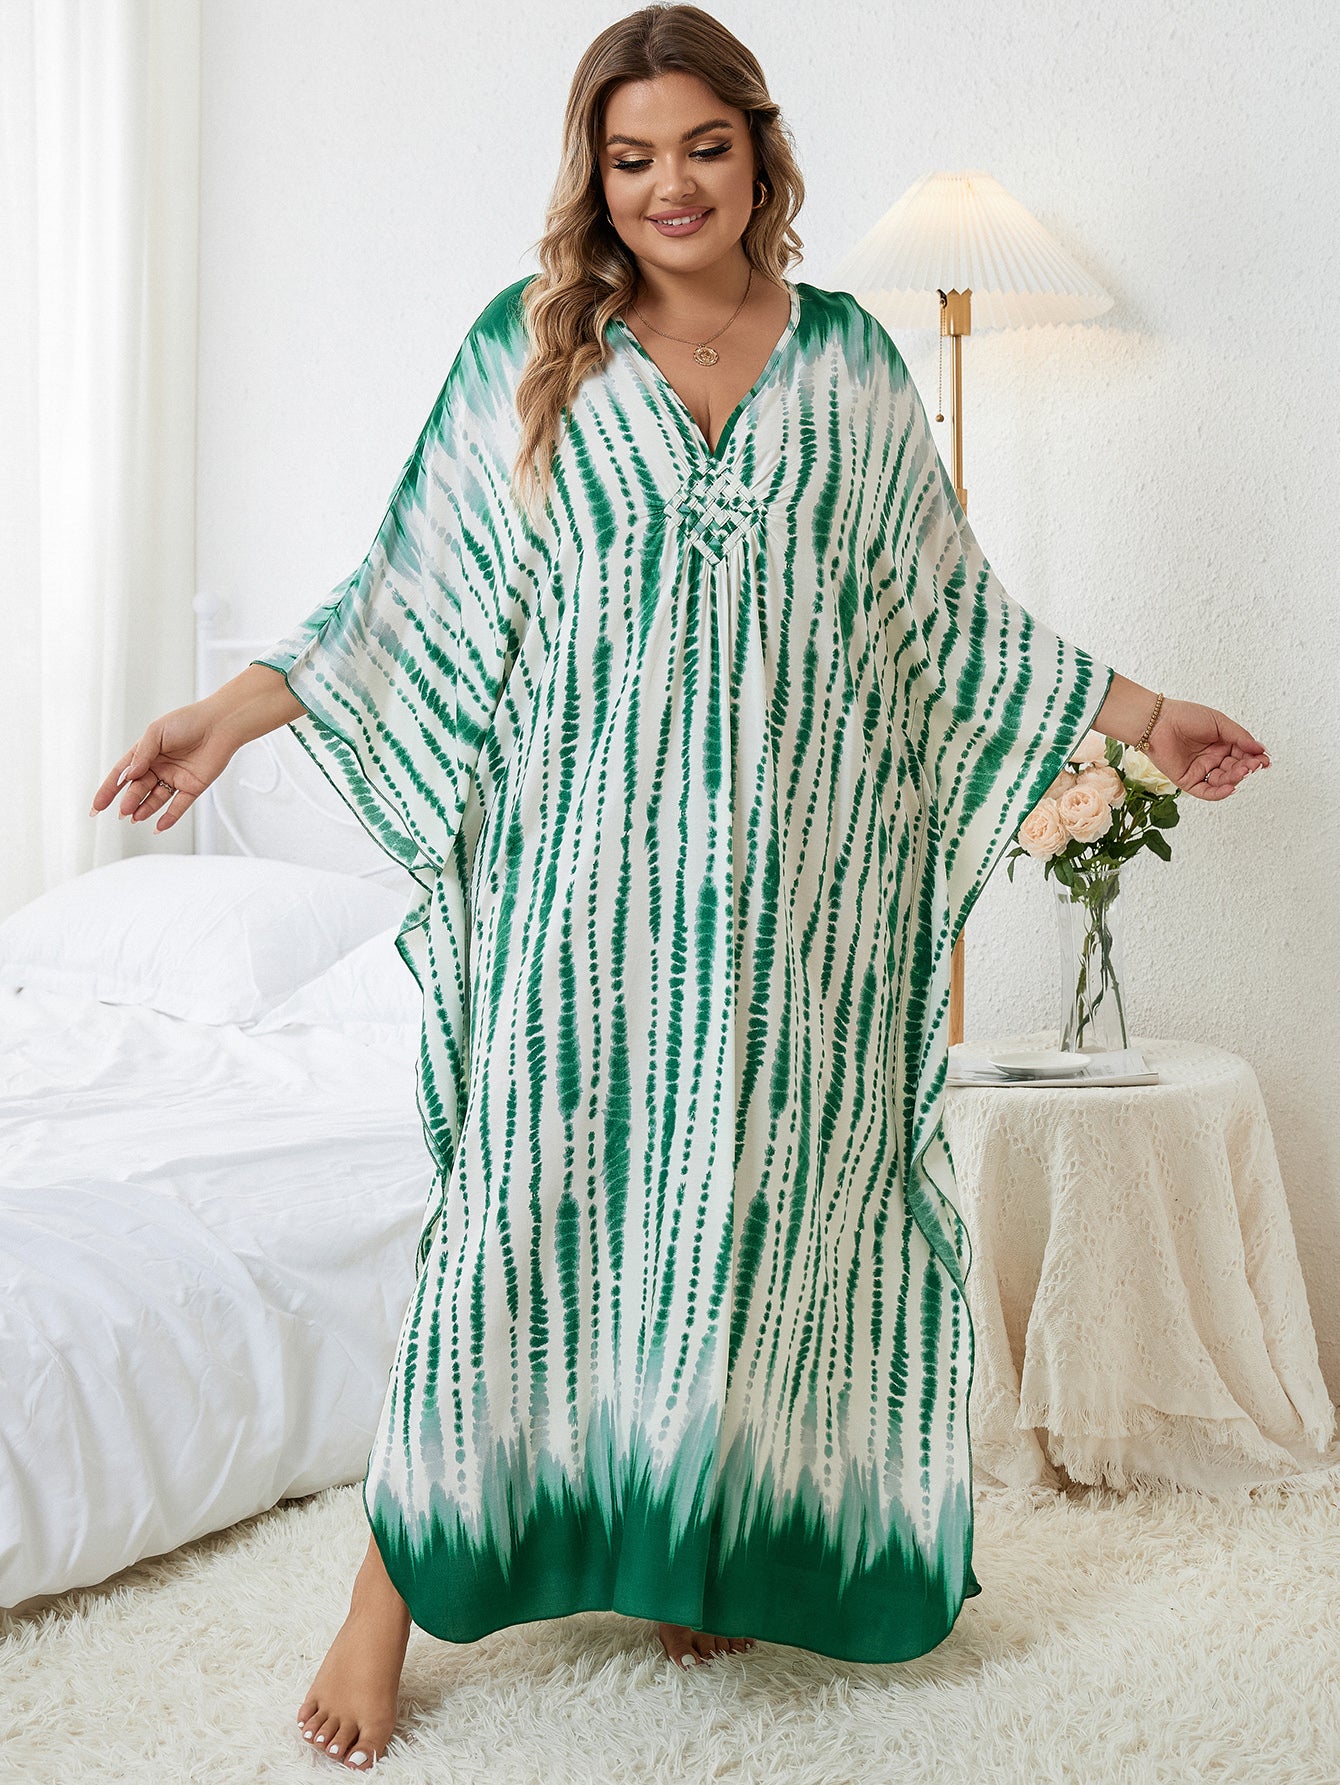 Plus Size Elegant Bathing Suit Cover Up Summer Women's Clothing Striped Printed Kaftans Casual Vacation Outfit African Caftans Q1523-8744-2